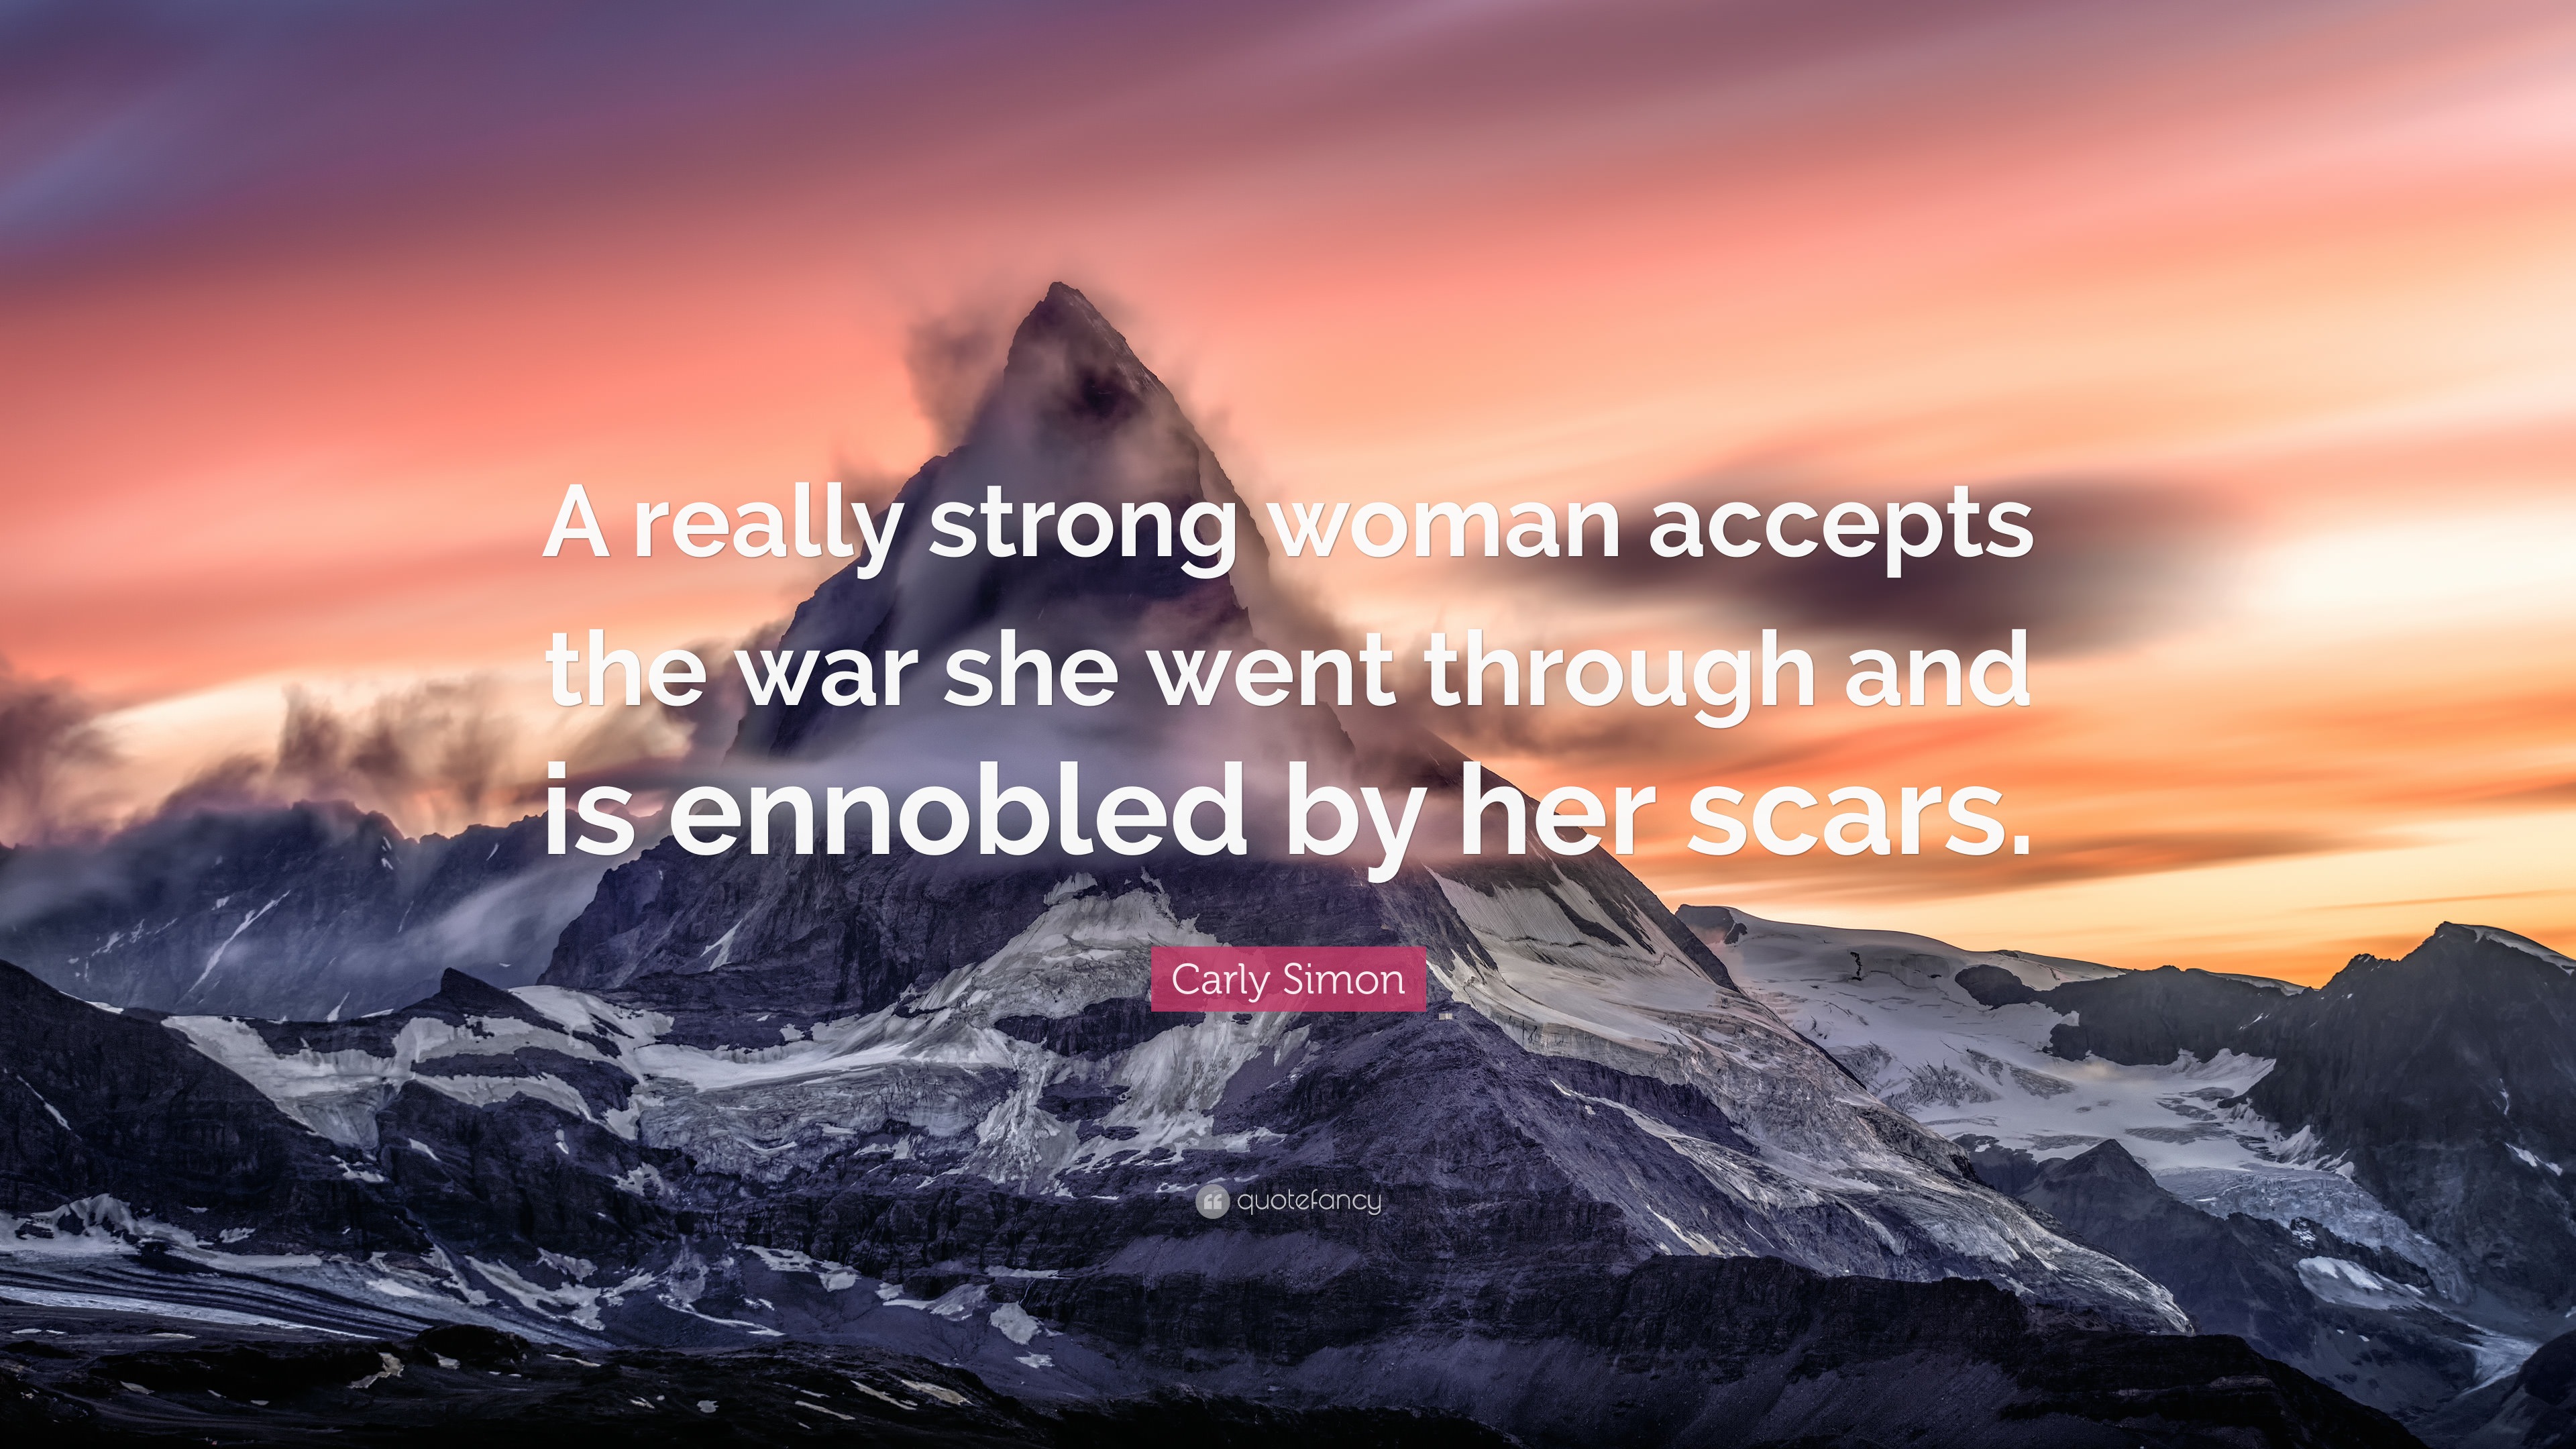 Carly Simon Quote: “A really strong woman accepts the war she went through  and is ennobled